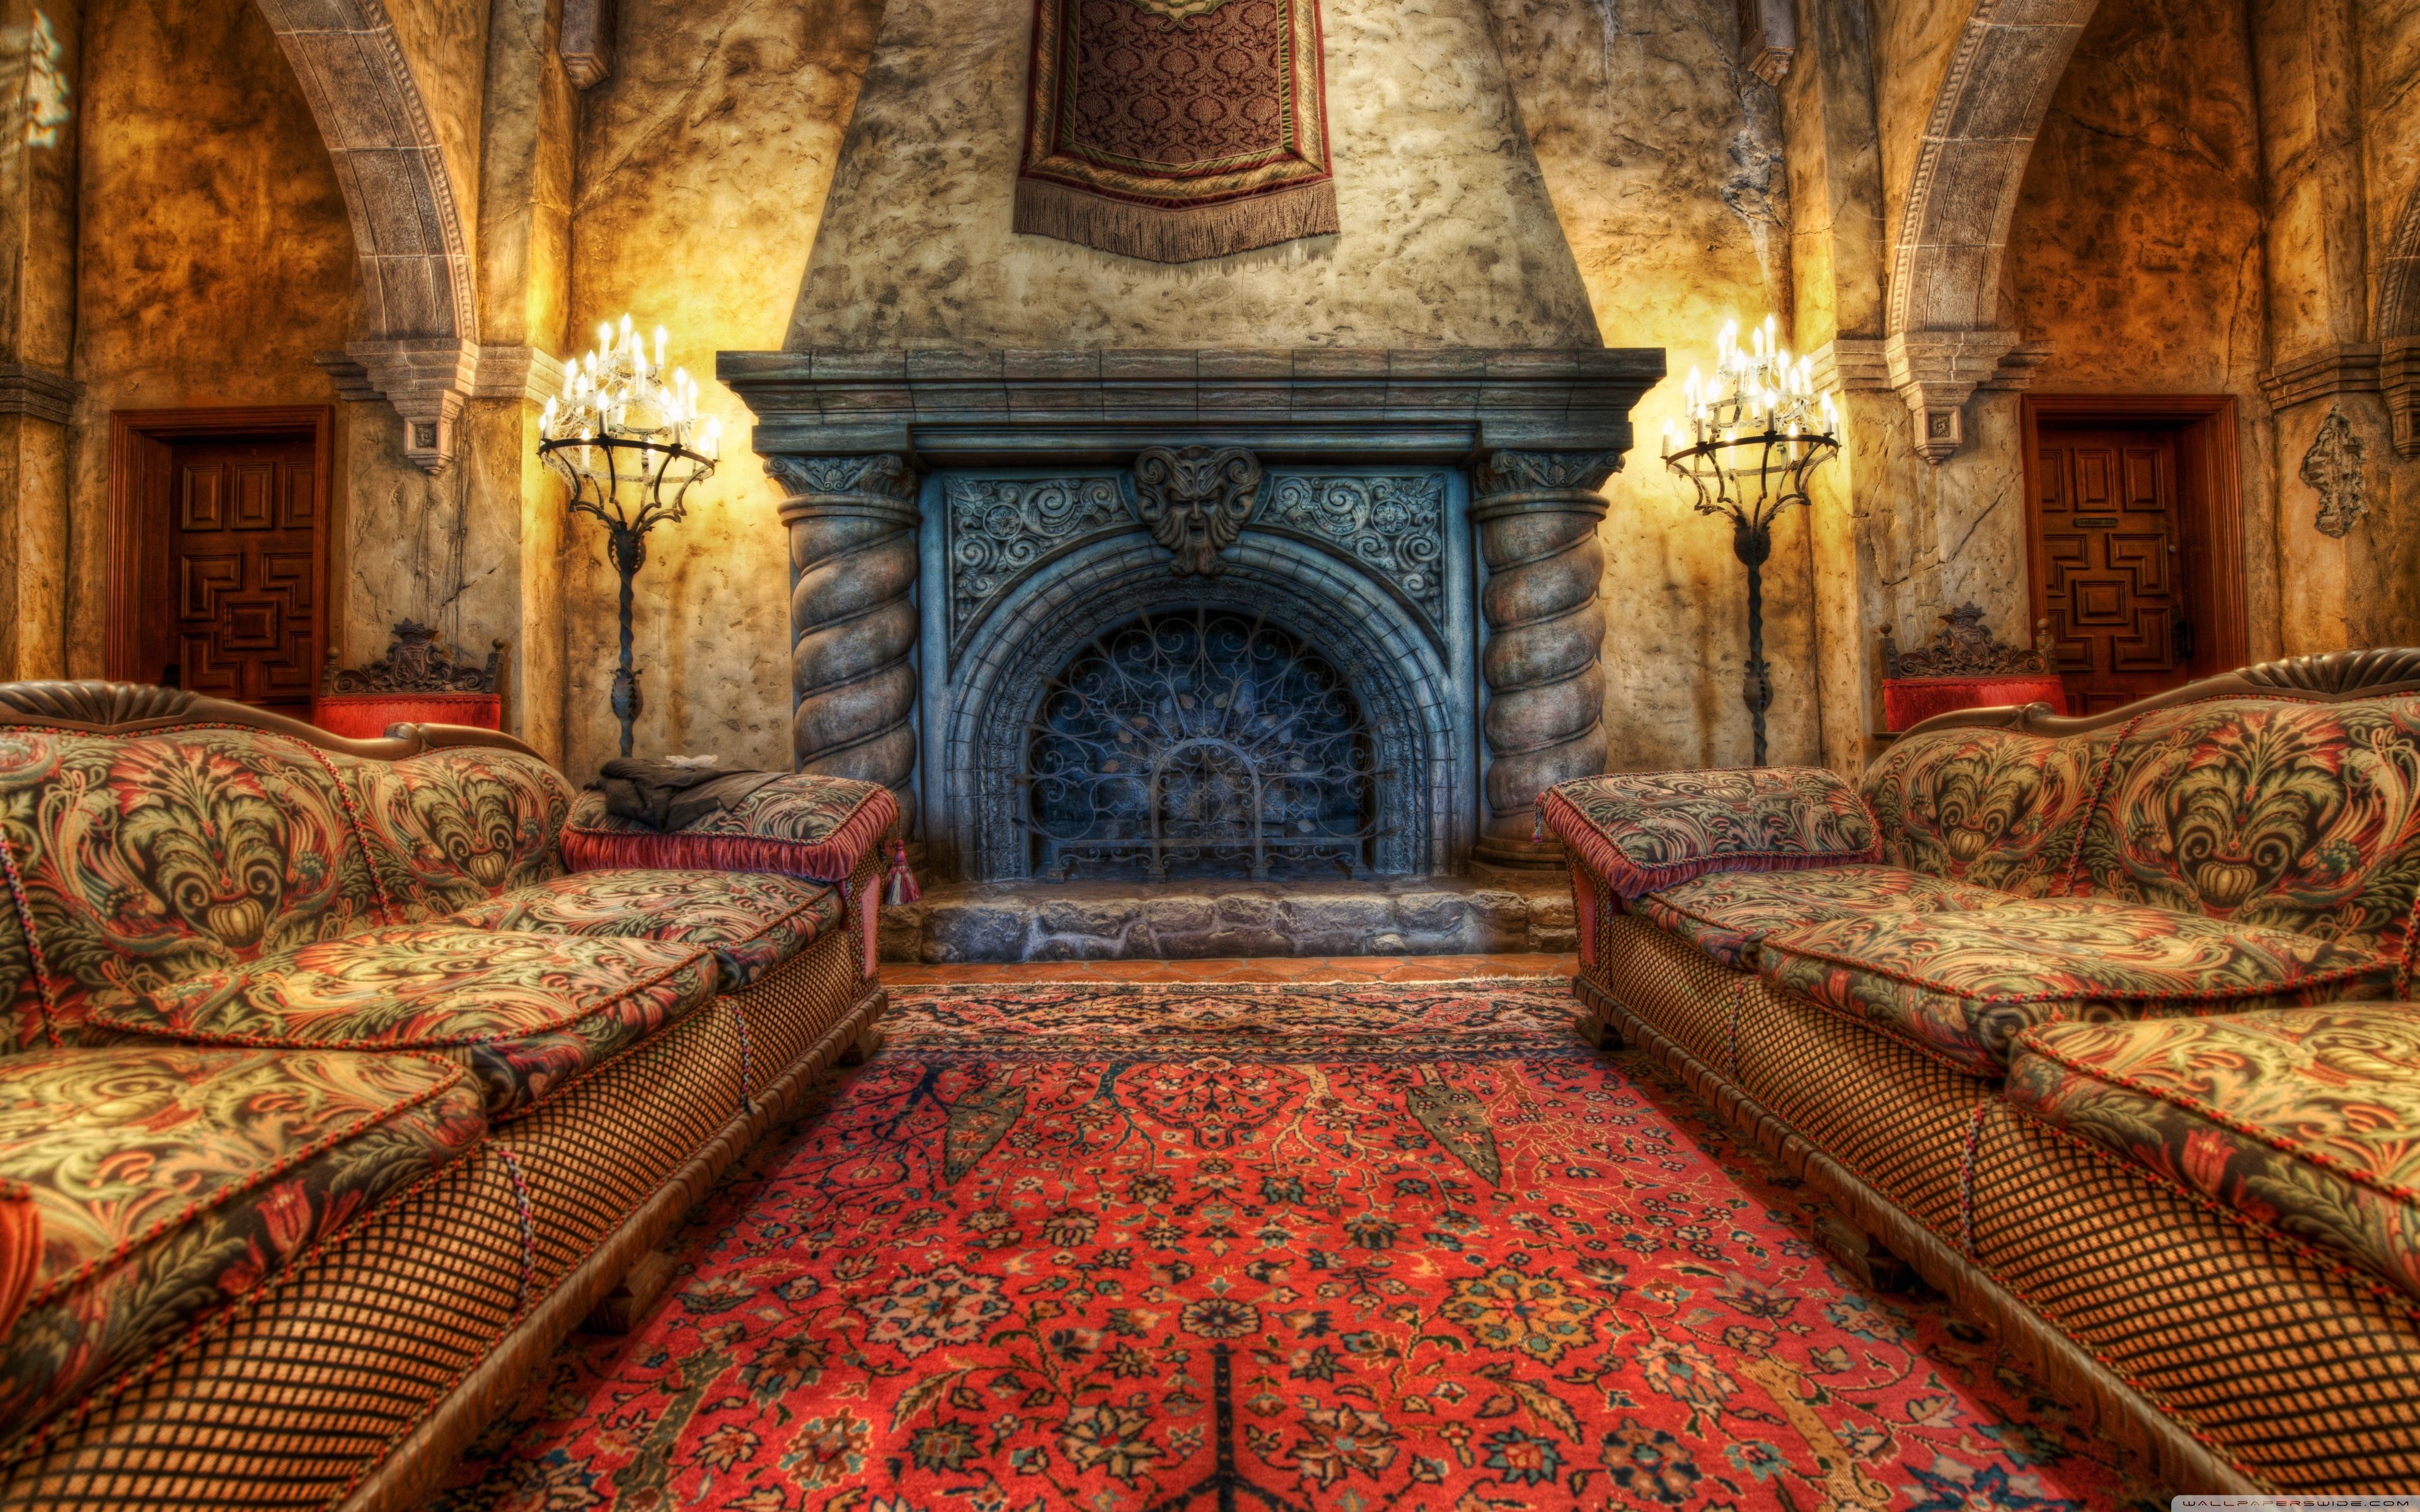 The Fireplace In The Tower Of Terror Ultra HD Desktop Background Wallpaper for 4K UHD TV, Tablet